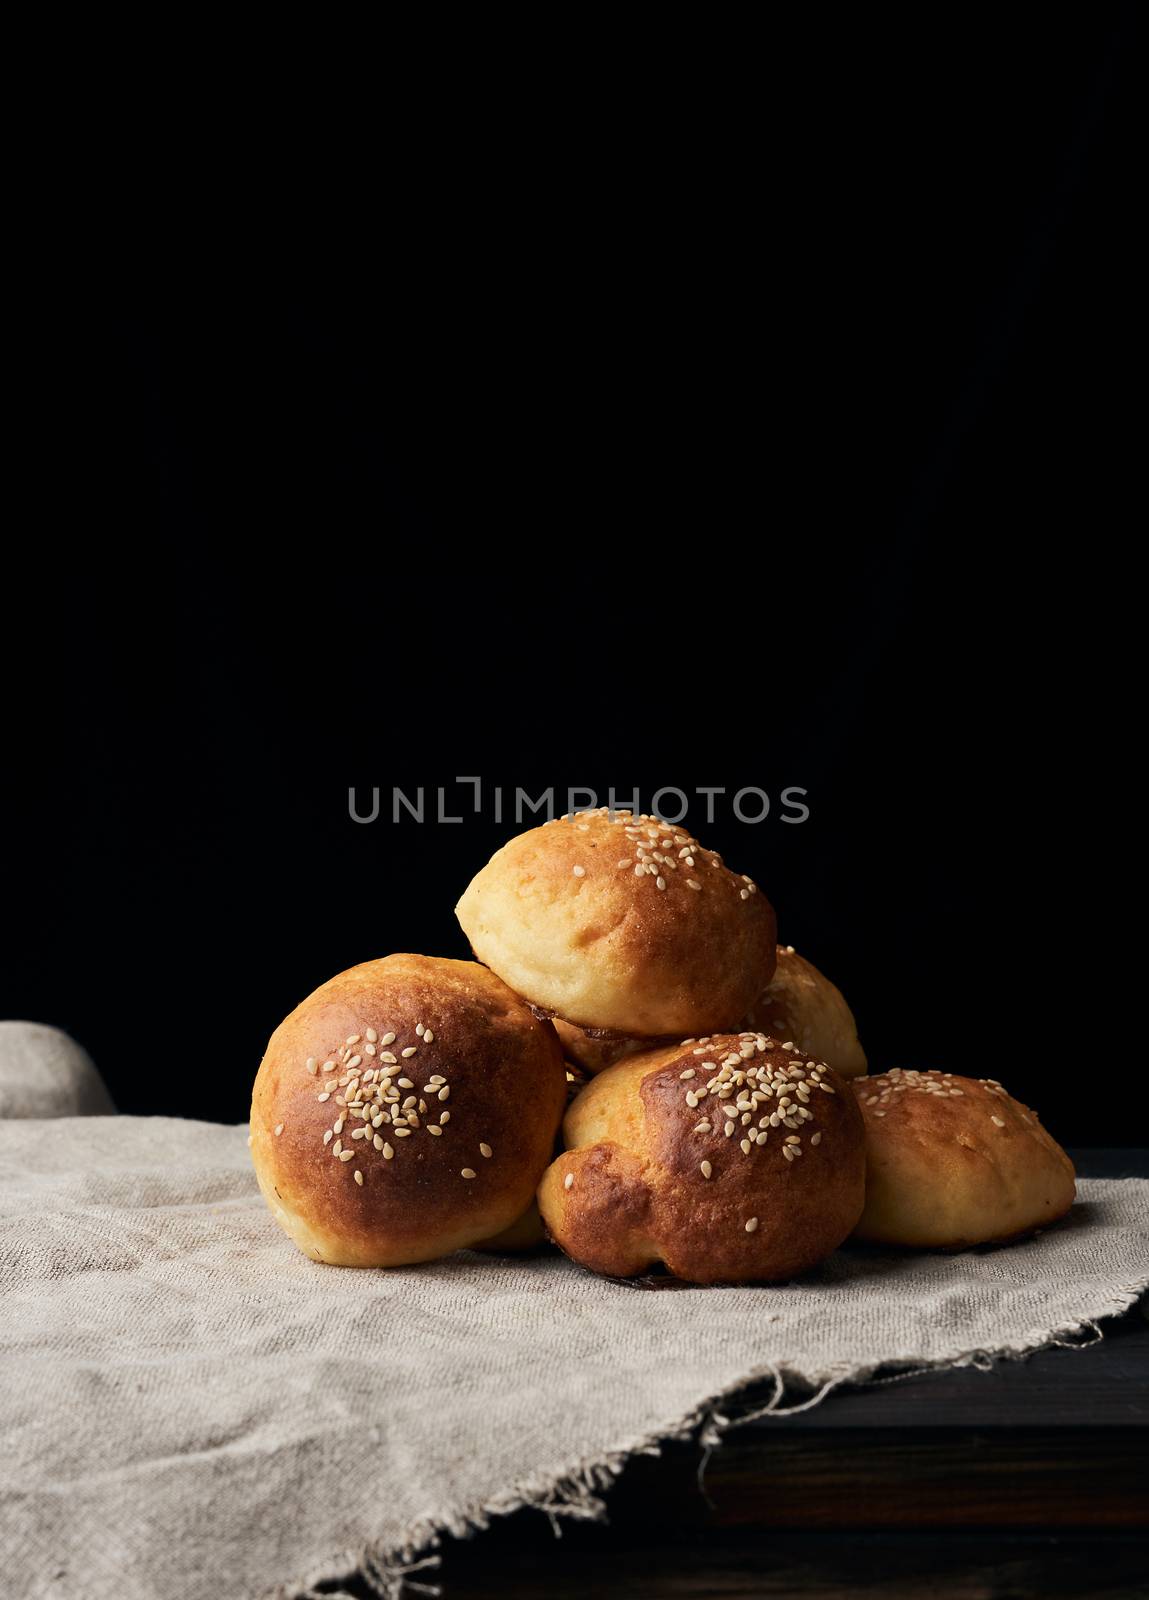 baked round bun with sesame seeds, black background, home baking by ndanko